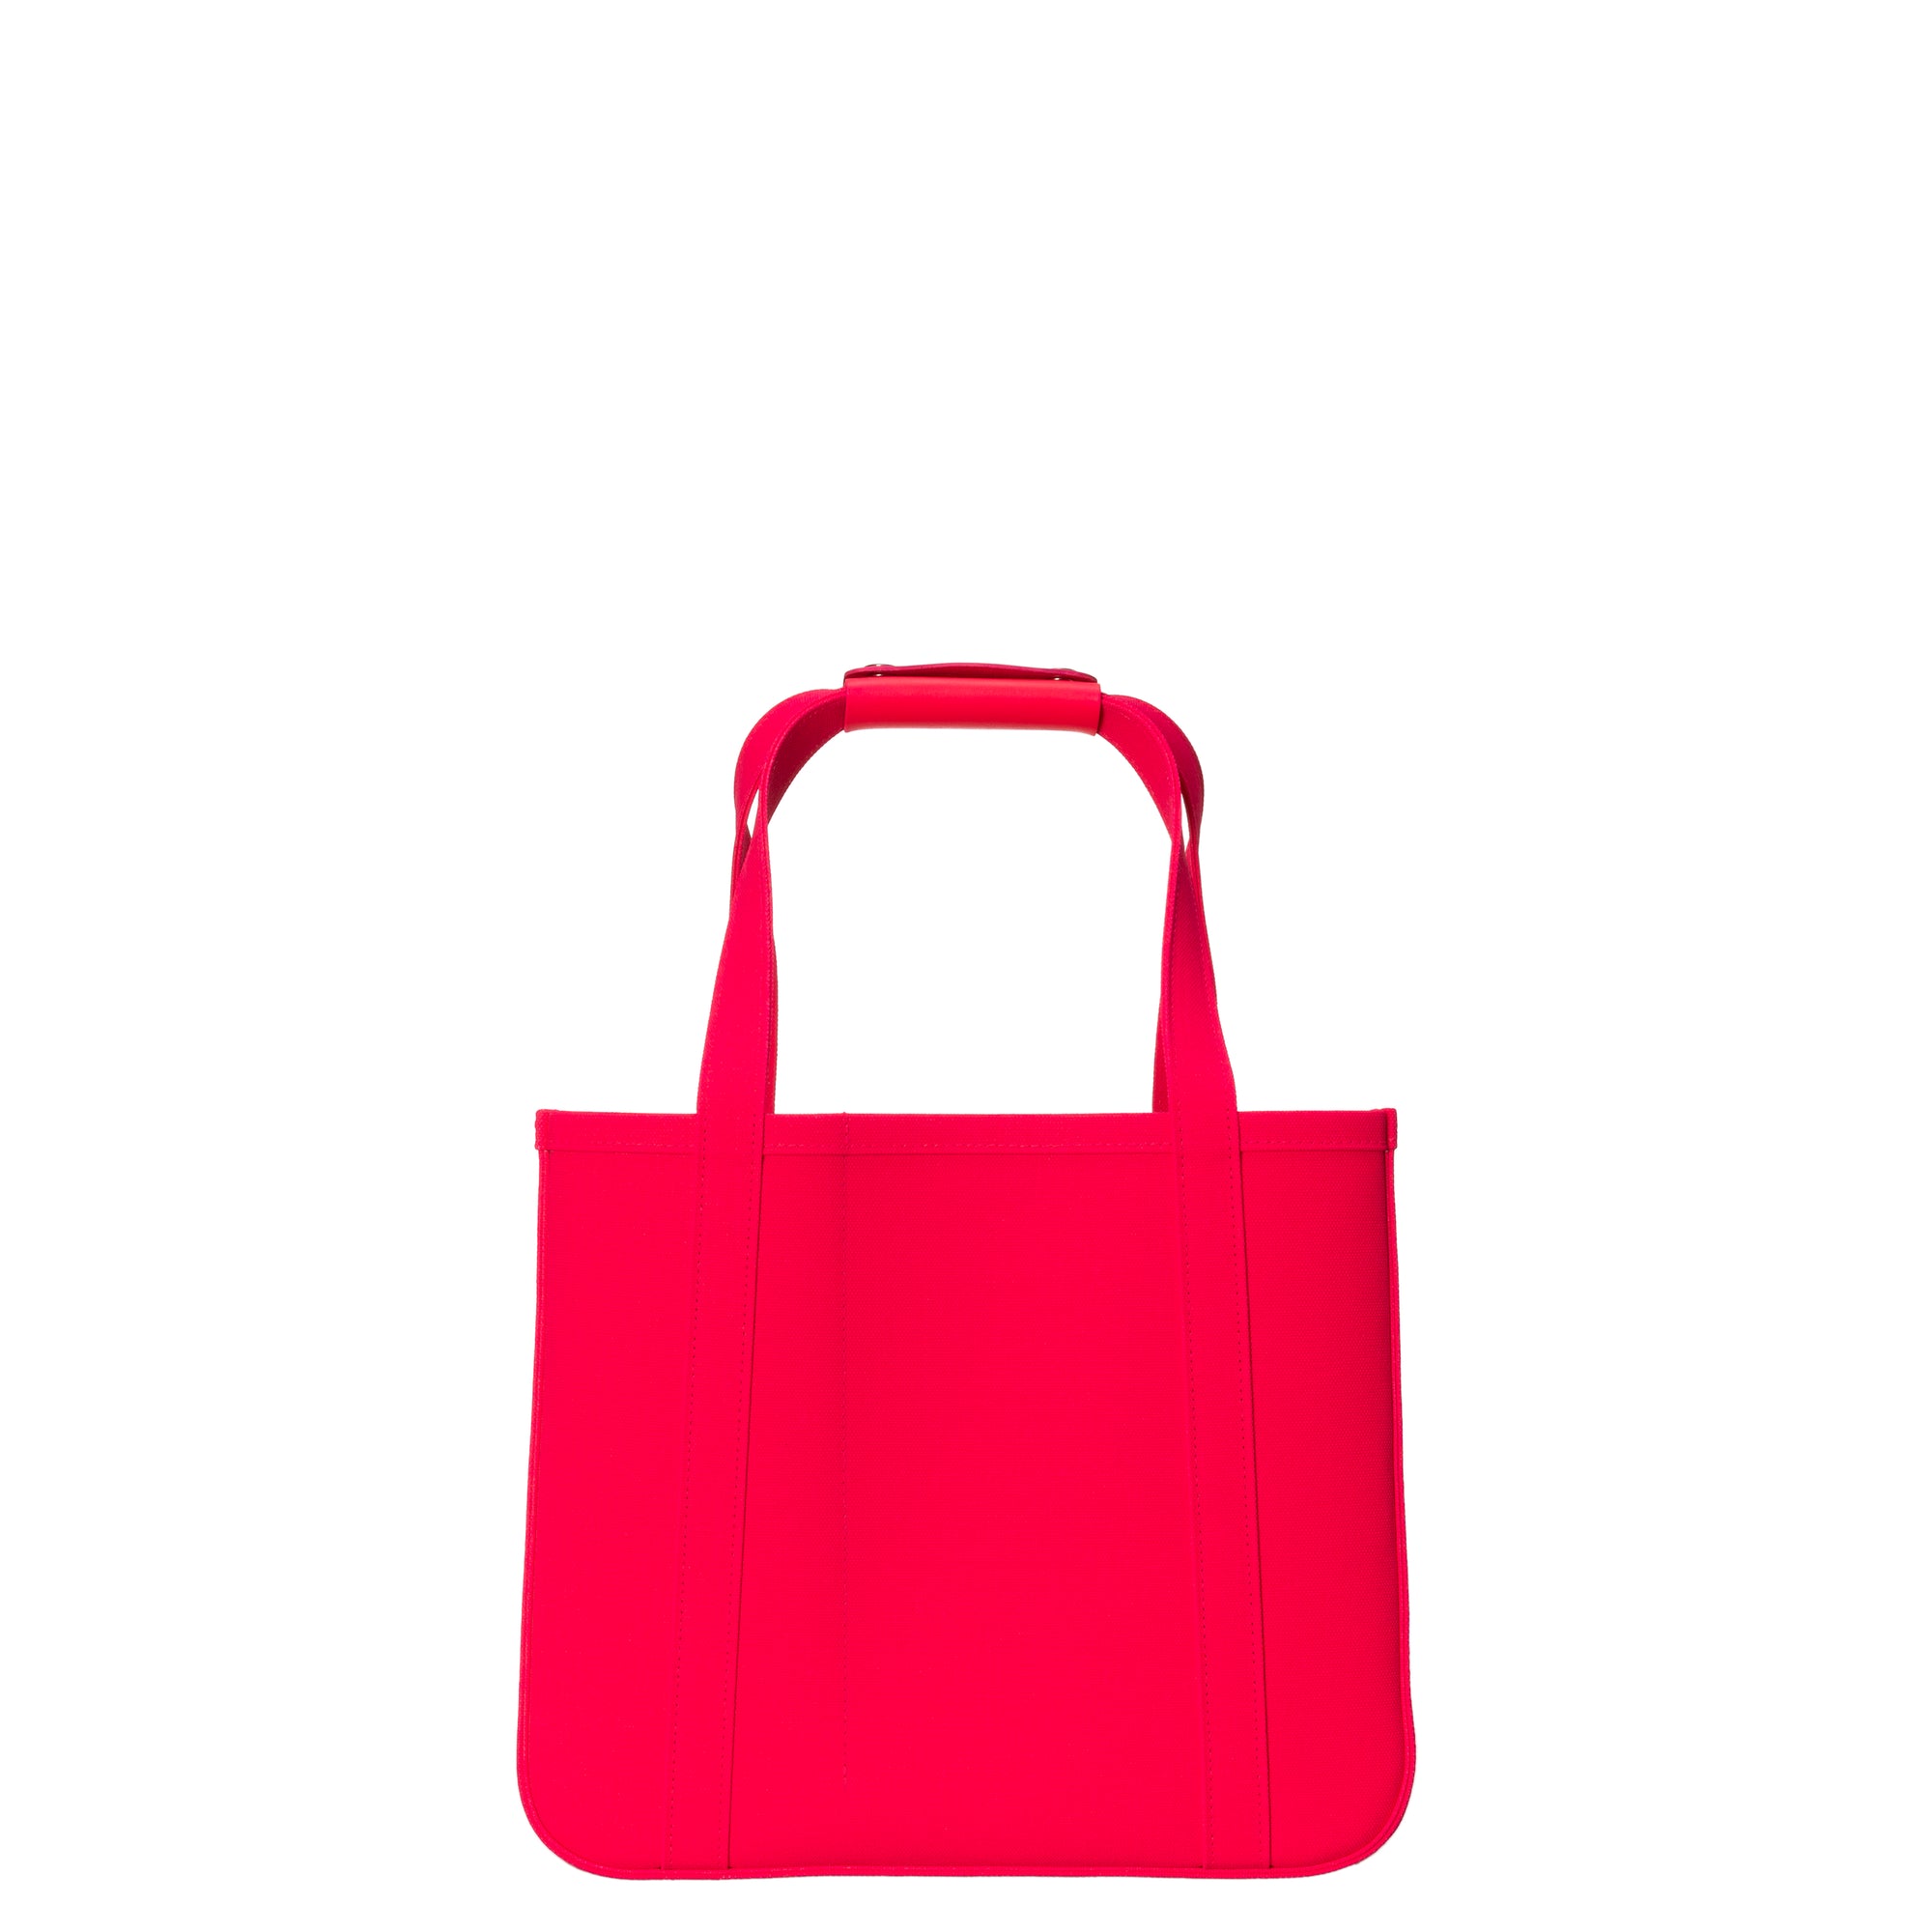 CHACOLI - 05 Tote W330 X H280 X D180 - (Neon Pink) view 1